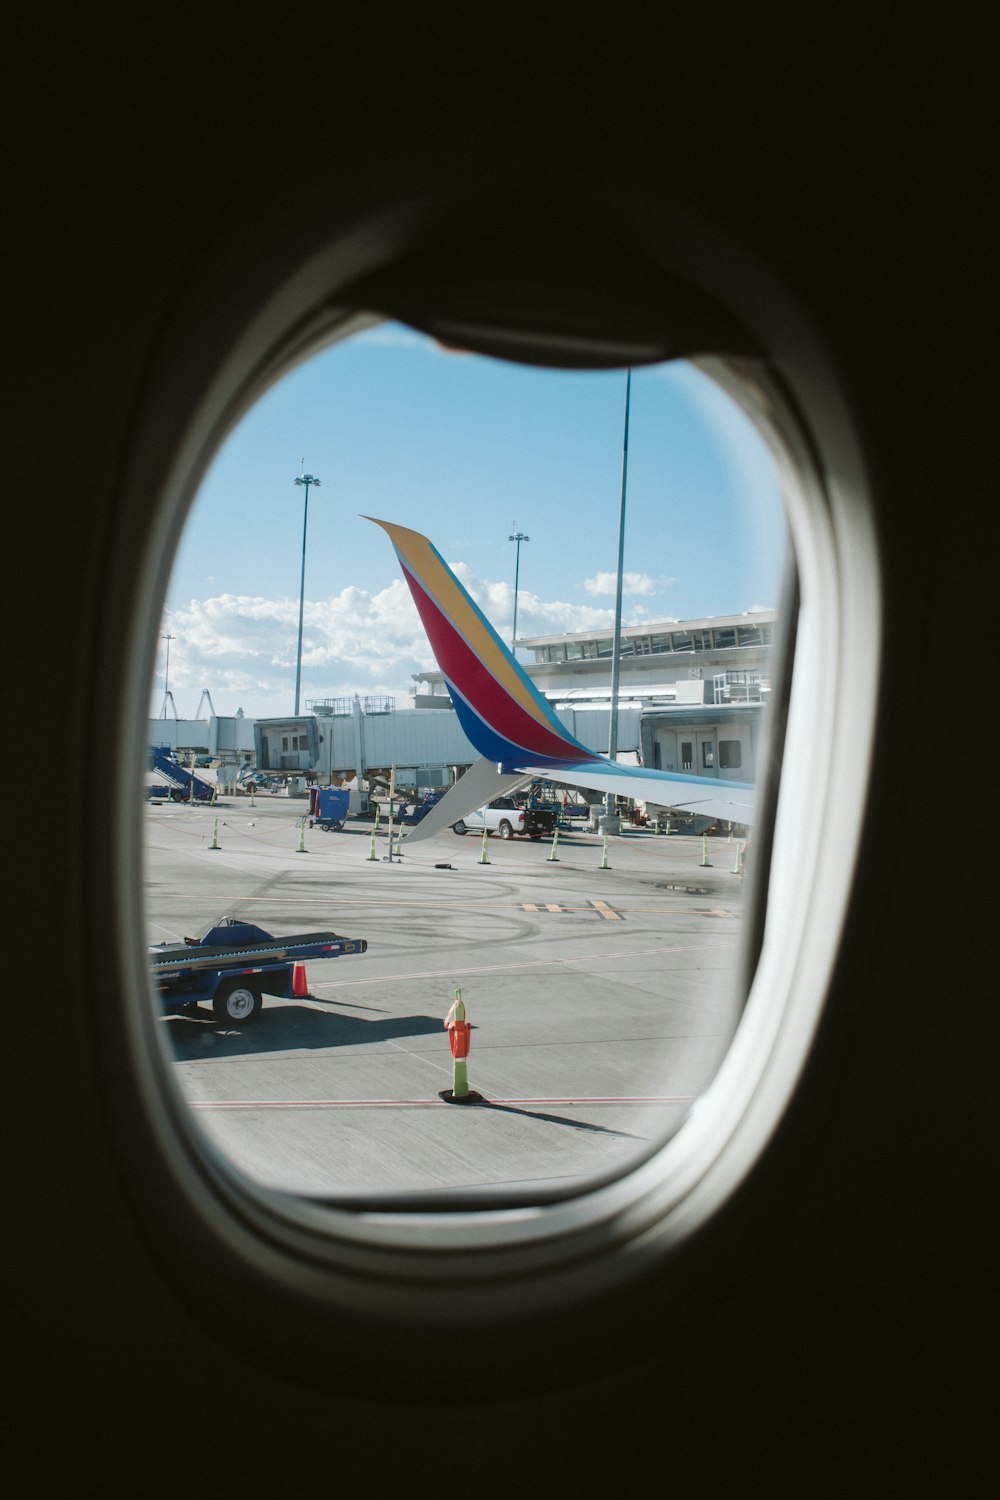 airliner window showing airport during daytime